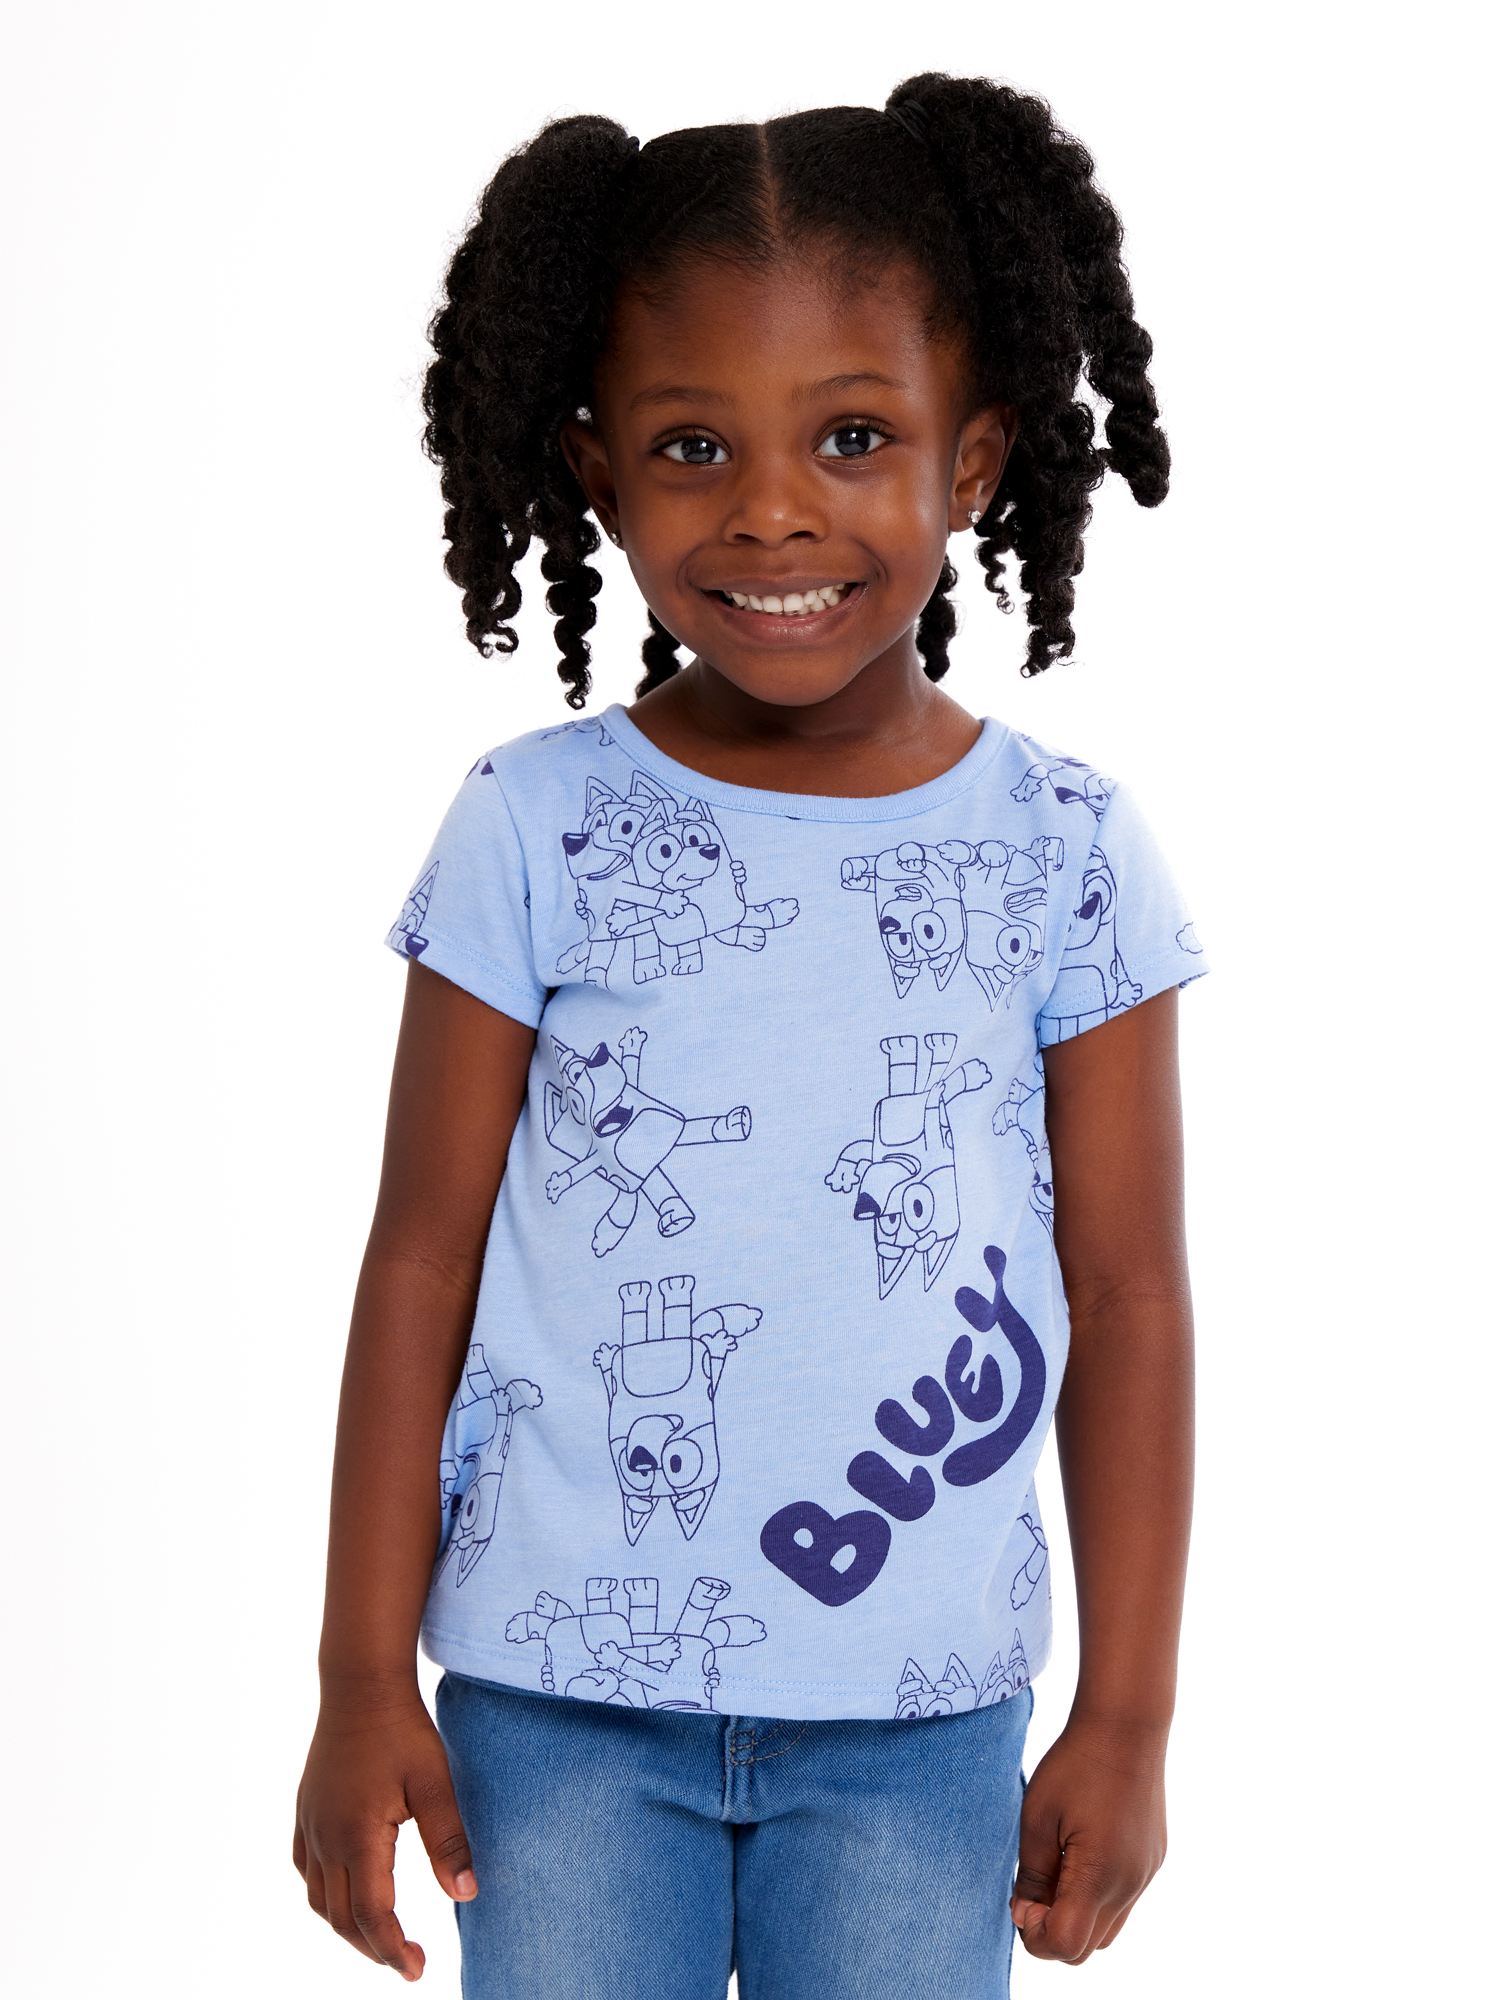 Bluey Toddler Girl Graphic Print Fashion T-Shirts, 4-Pack, Sizes 2T-5T - image 2 of 14